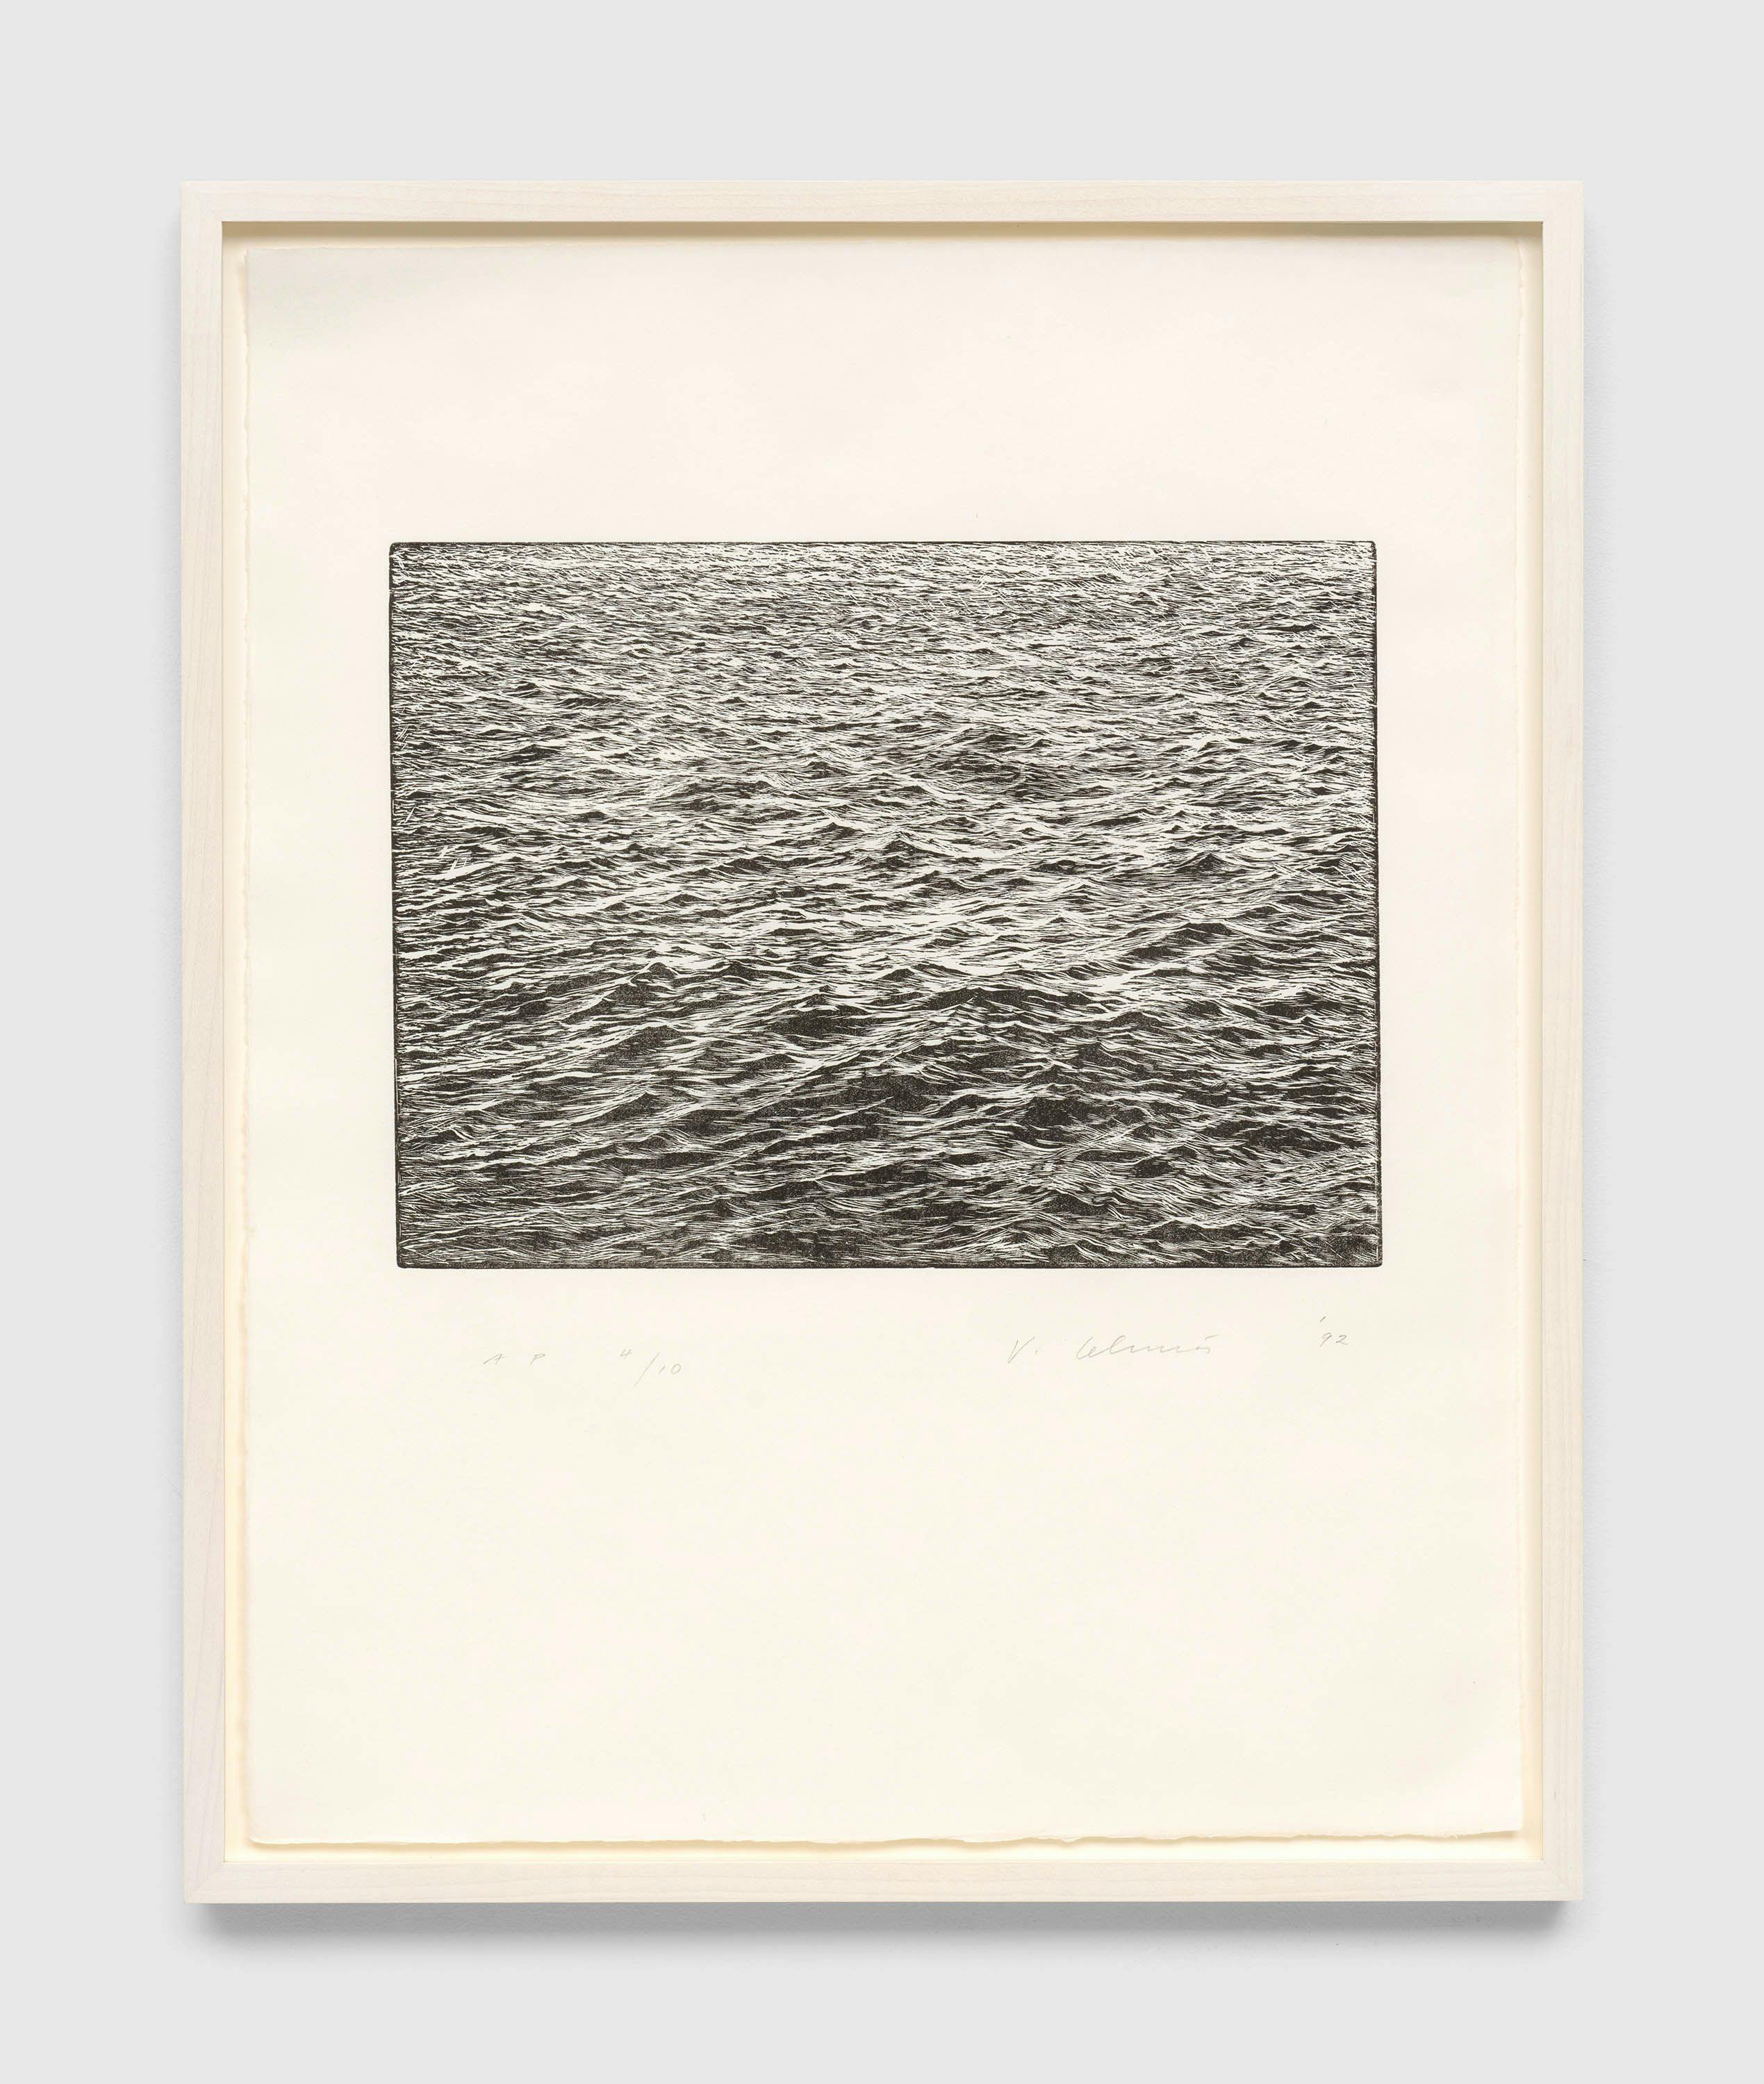 A print by Vija Celmins, titled Ocean Surface Woodcut 1992, dated 1992.